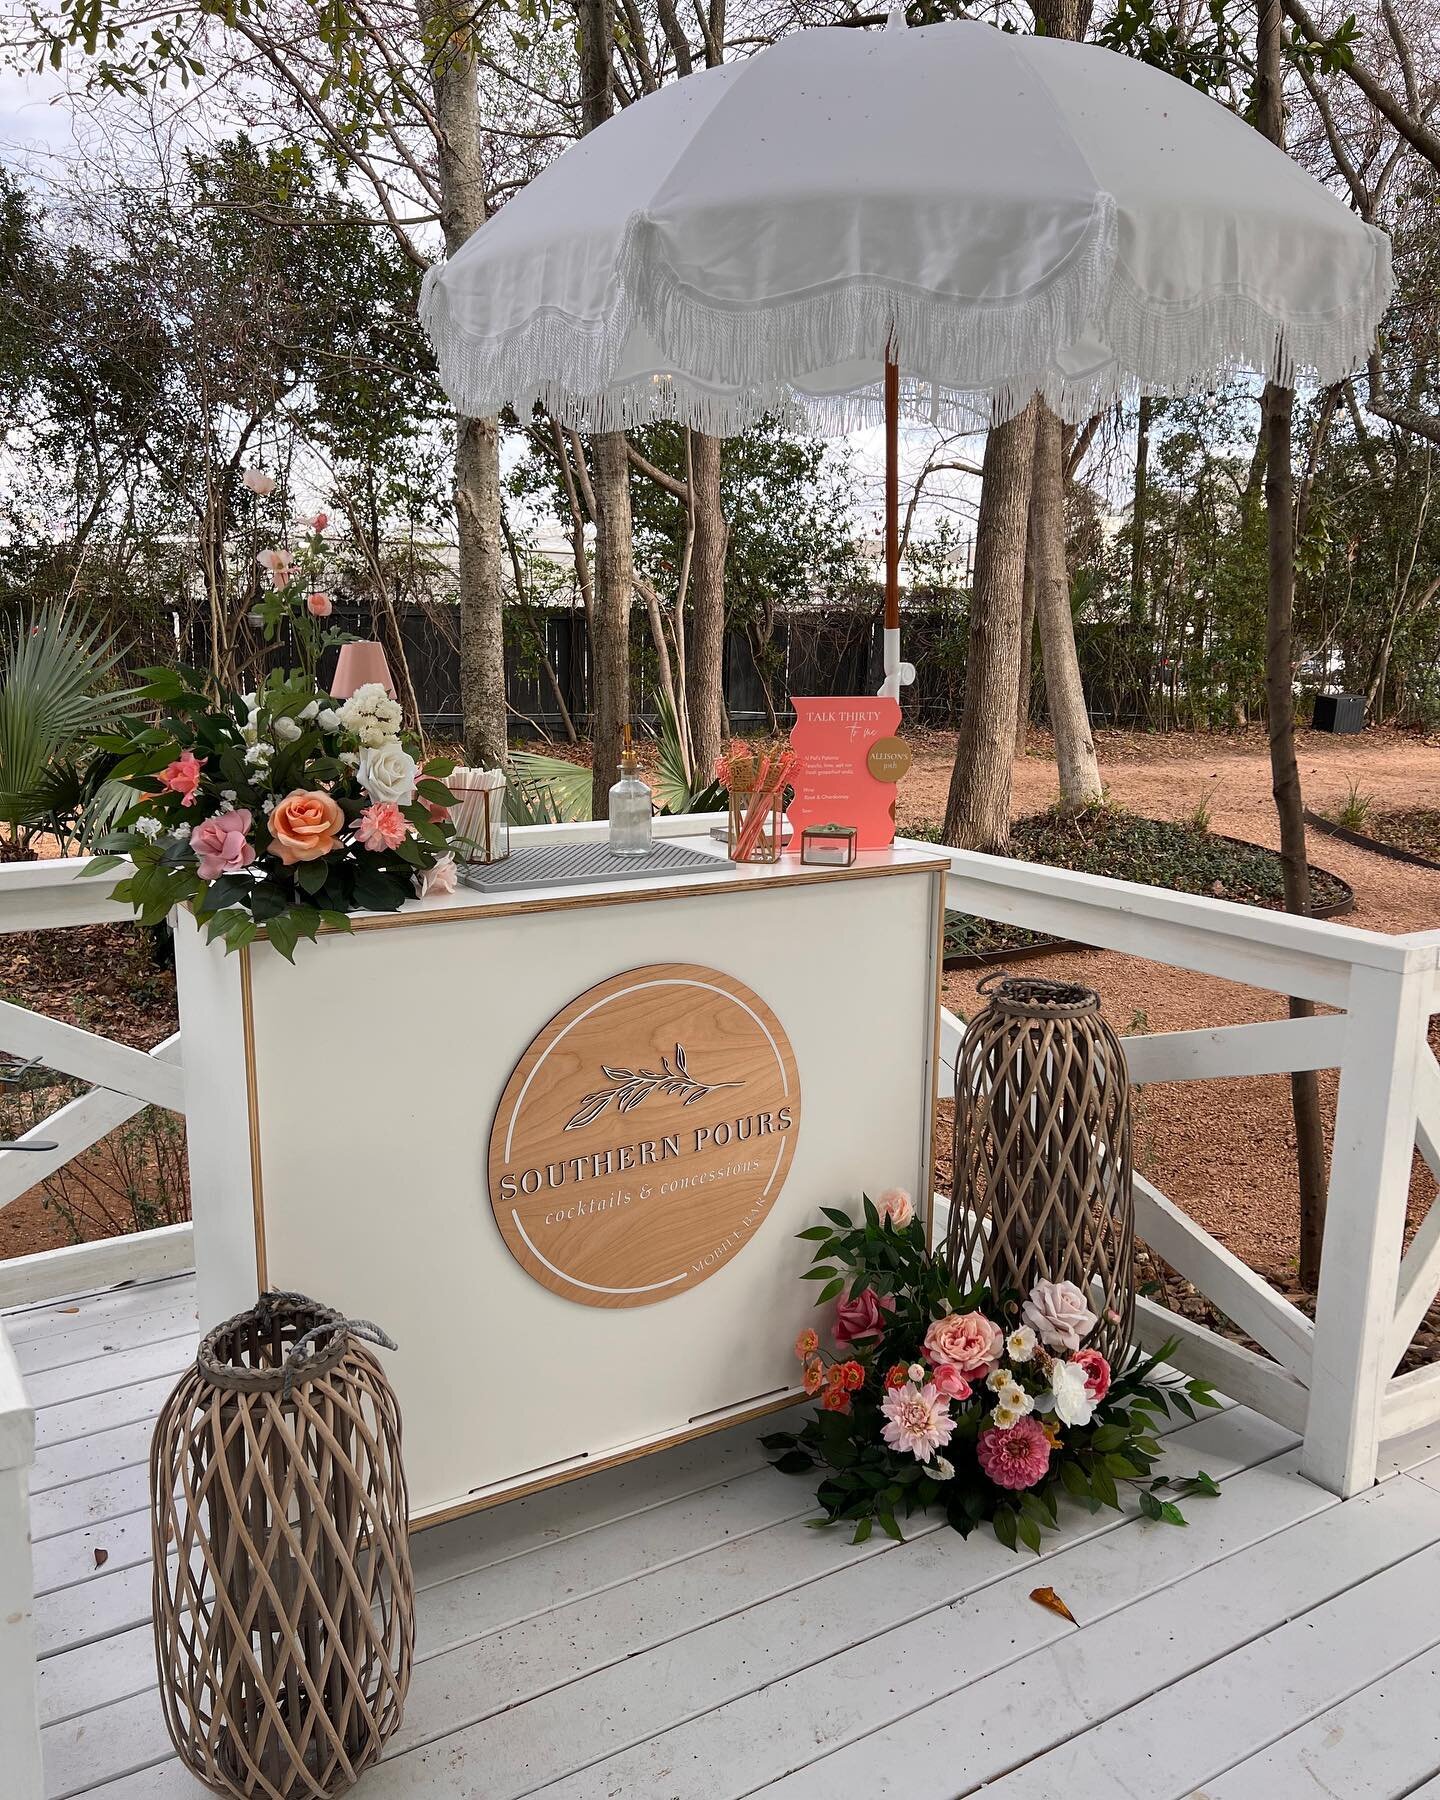 What should we name our mobile bar??
She&rsquo;s a cutie and we can&rsquo;t get enough of her😍😍 especially when styled by @sugarandcloth
&bull;
&bull;
&bull;
Leave your suggestions below! &amp; we might pick a winner for a free batched cocktail thi